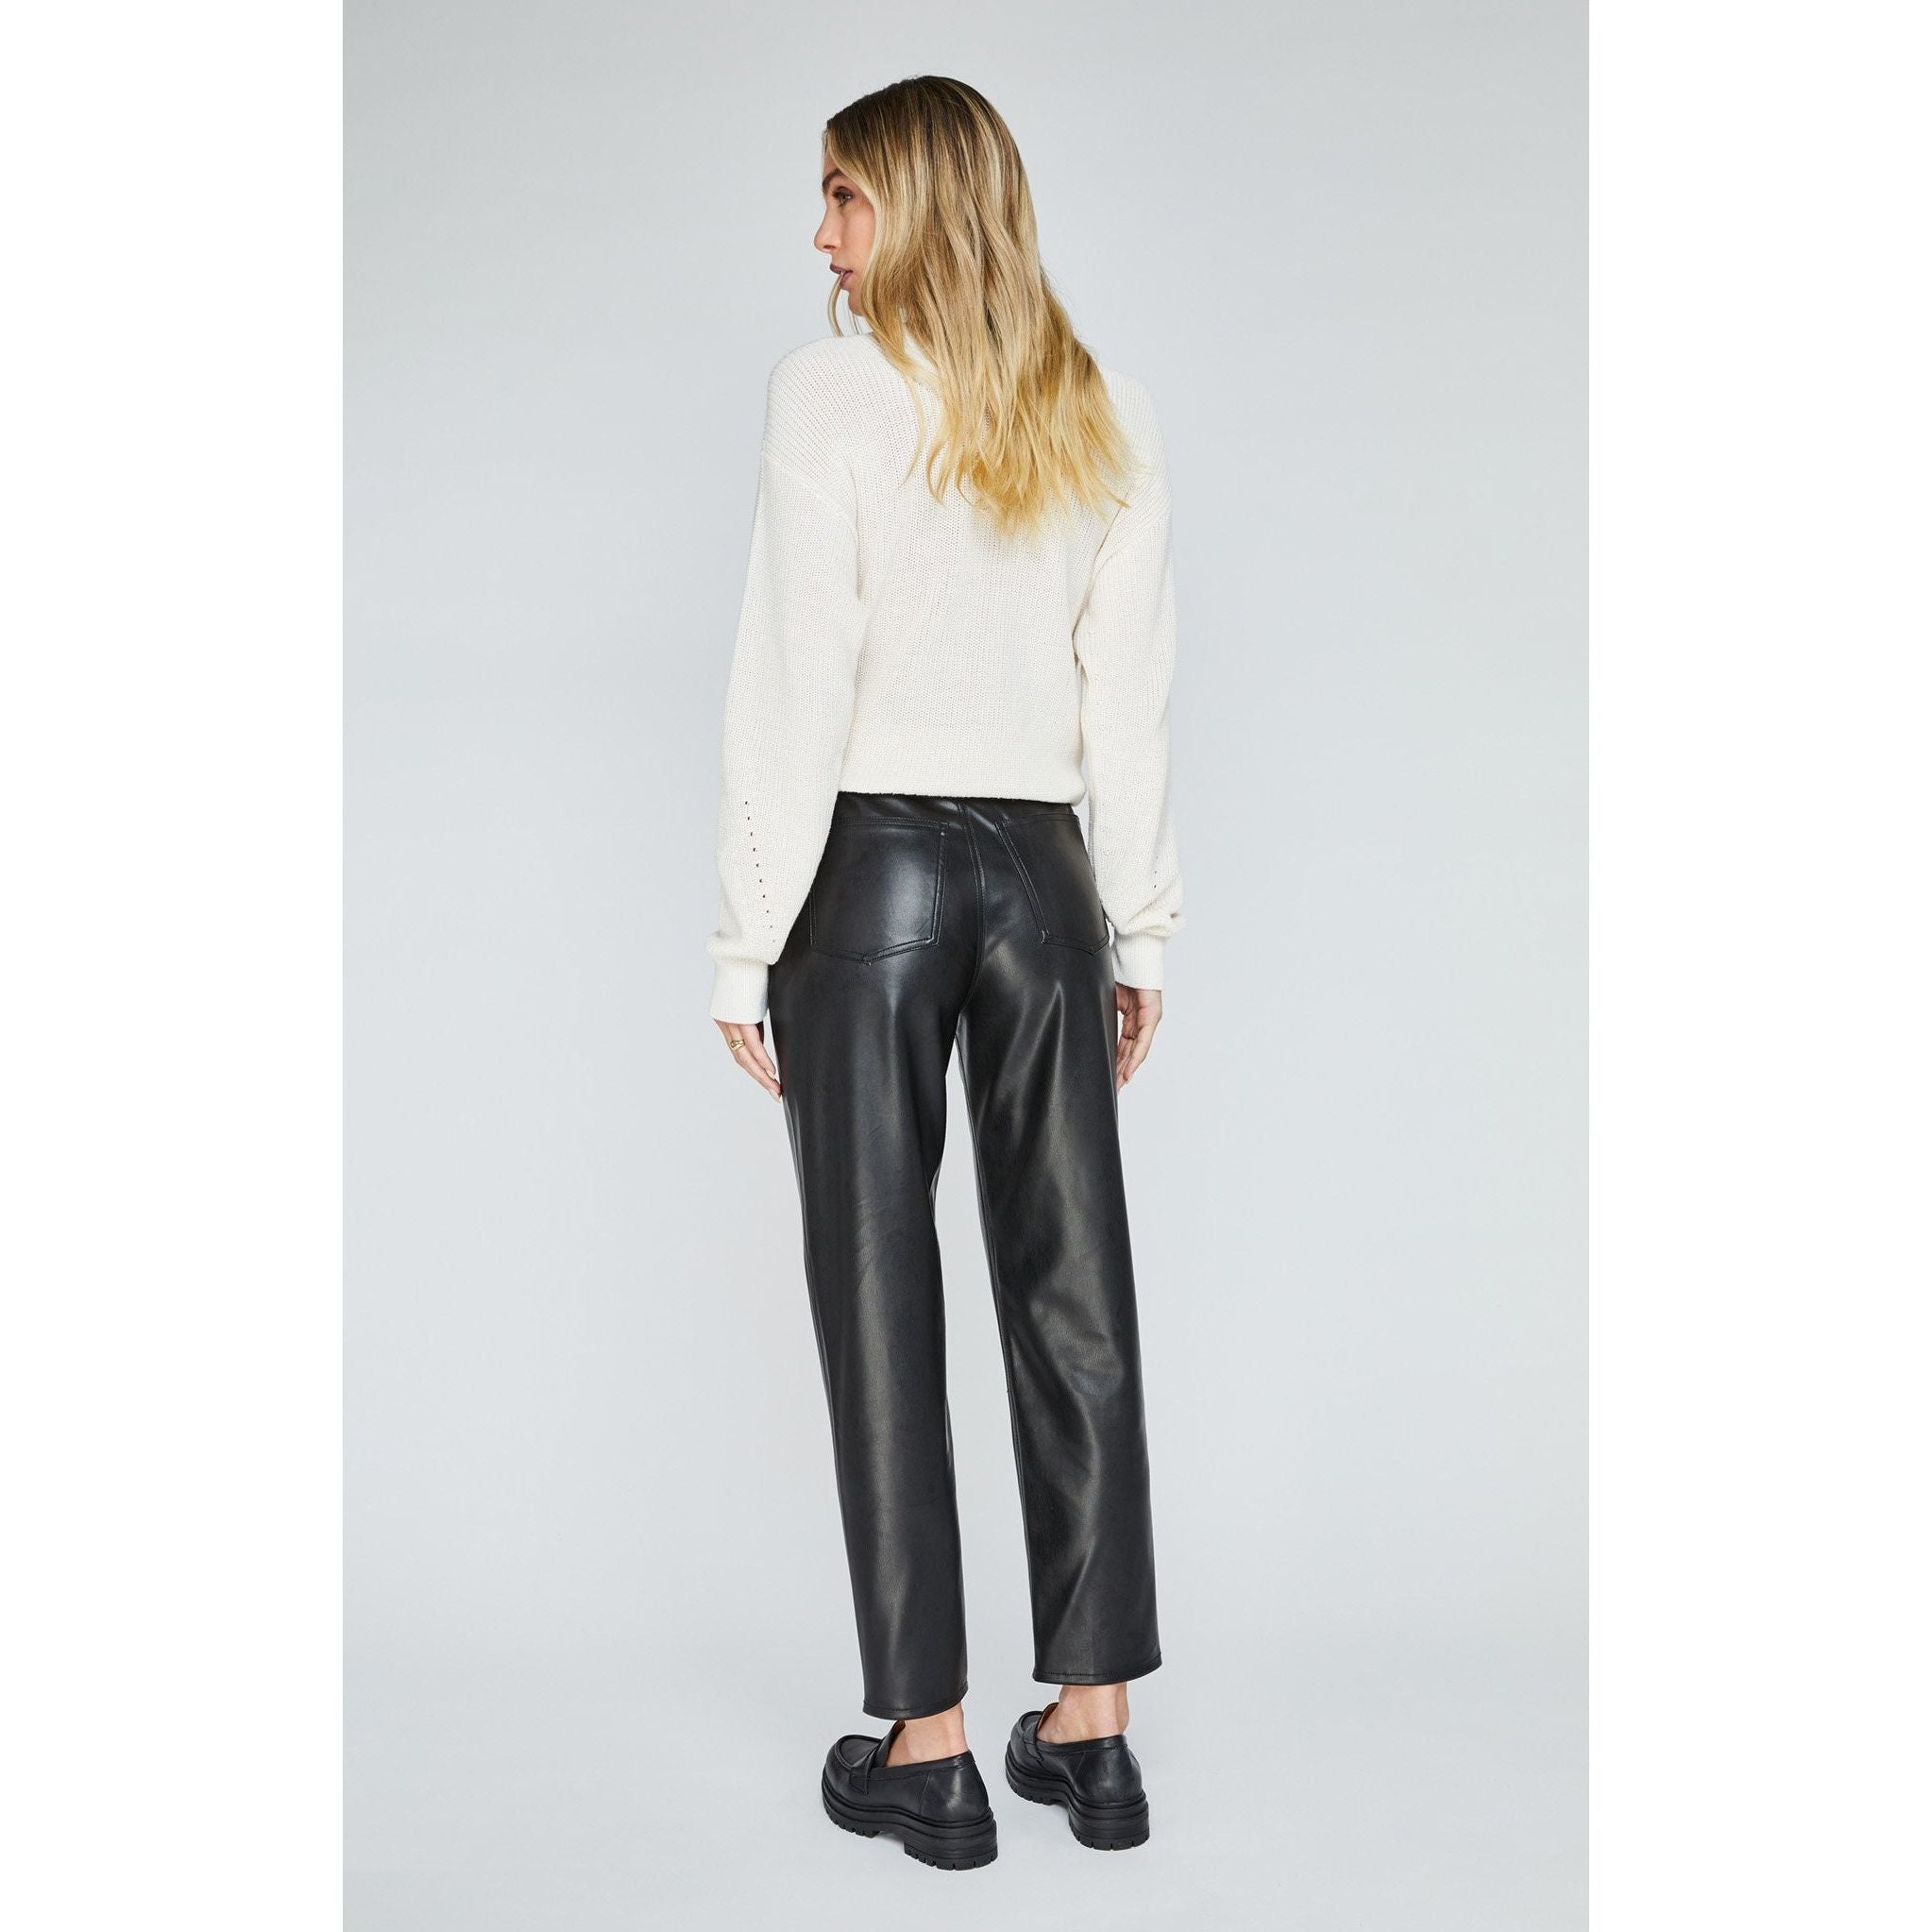 Gentle Fawn - Carter Faux Leather Pant in Black-SQ9762047